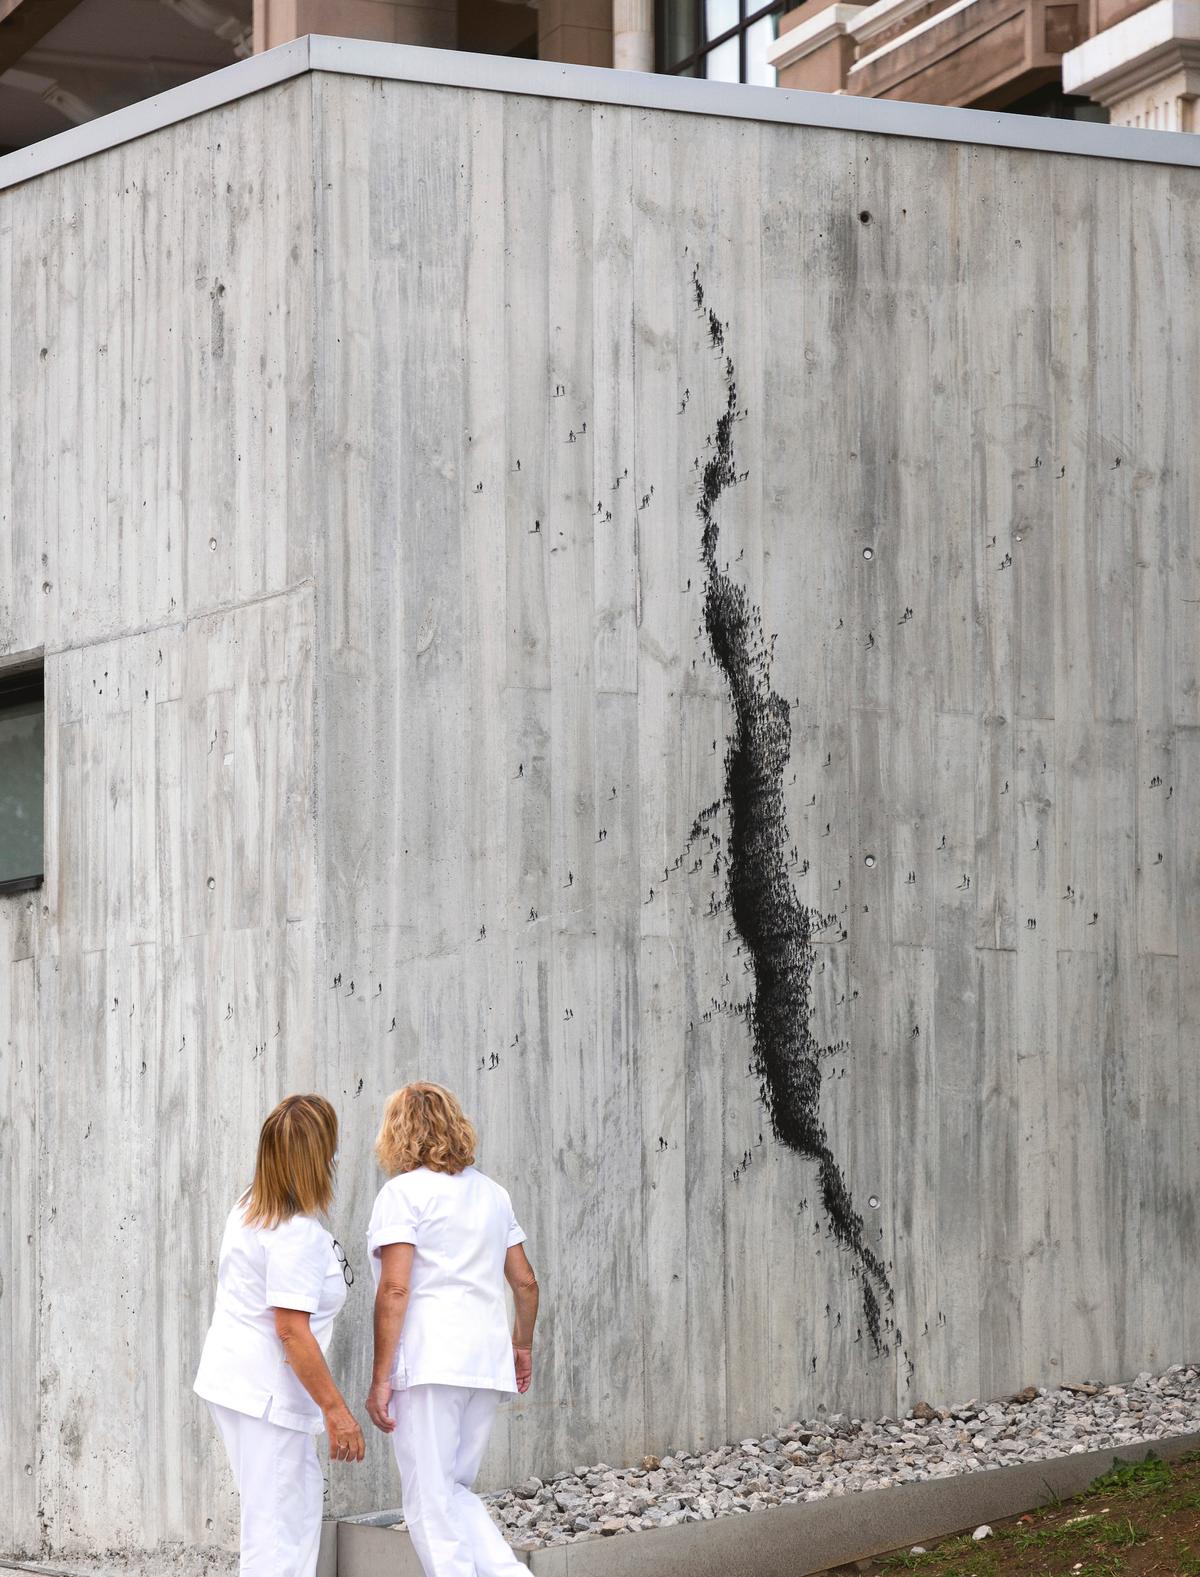  Social Distancing: The artwork creates an illusion of a widening crack made of numerous human silhouettes. Pejac used the crevice to represent the trauma and loss caused by the COVID-19 pandemic while depicting the human struggle to escape it. (Courtesy of ©PEJAC, @<a href="https://www.instagram.com/pejac_art/">pejac_art</a>)